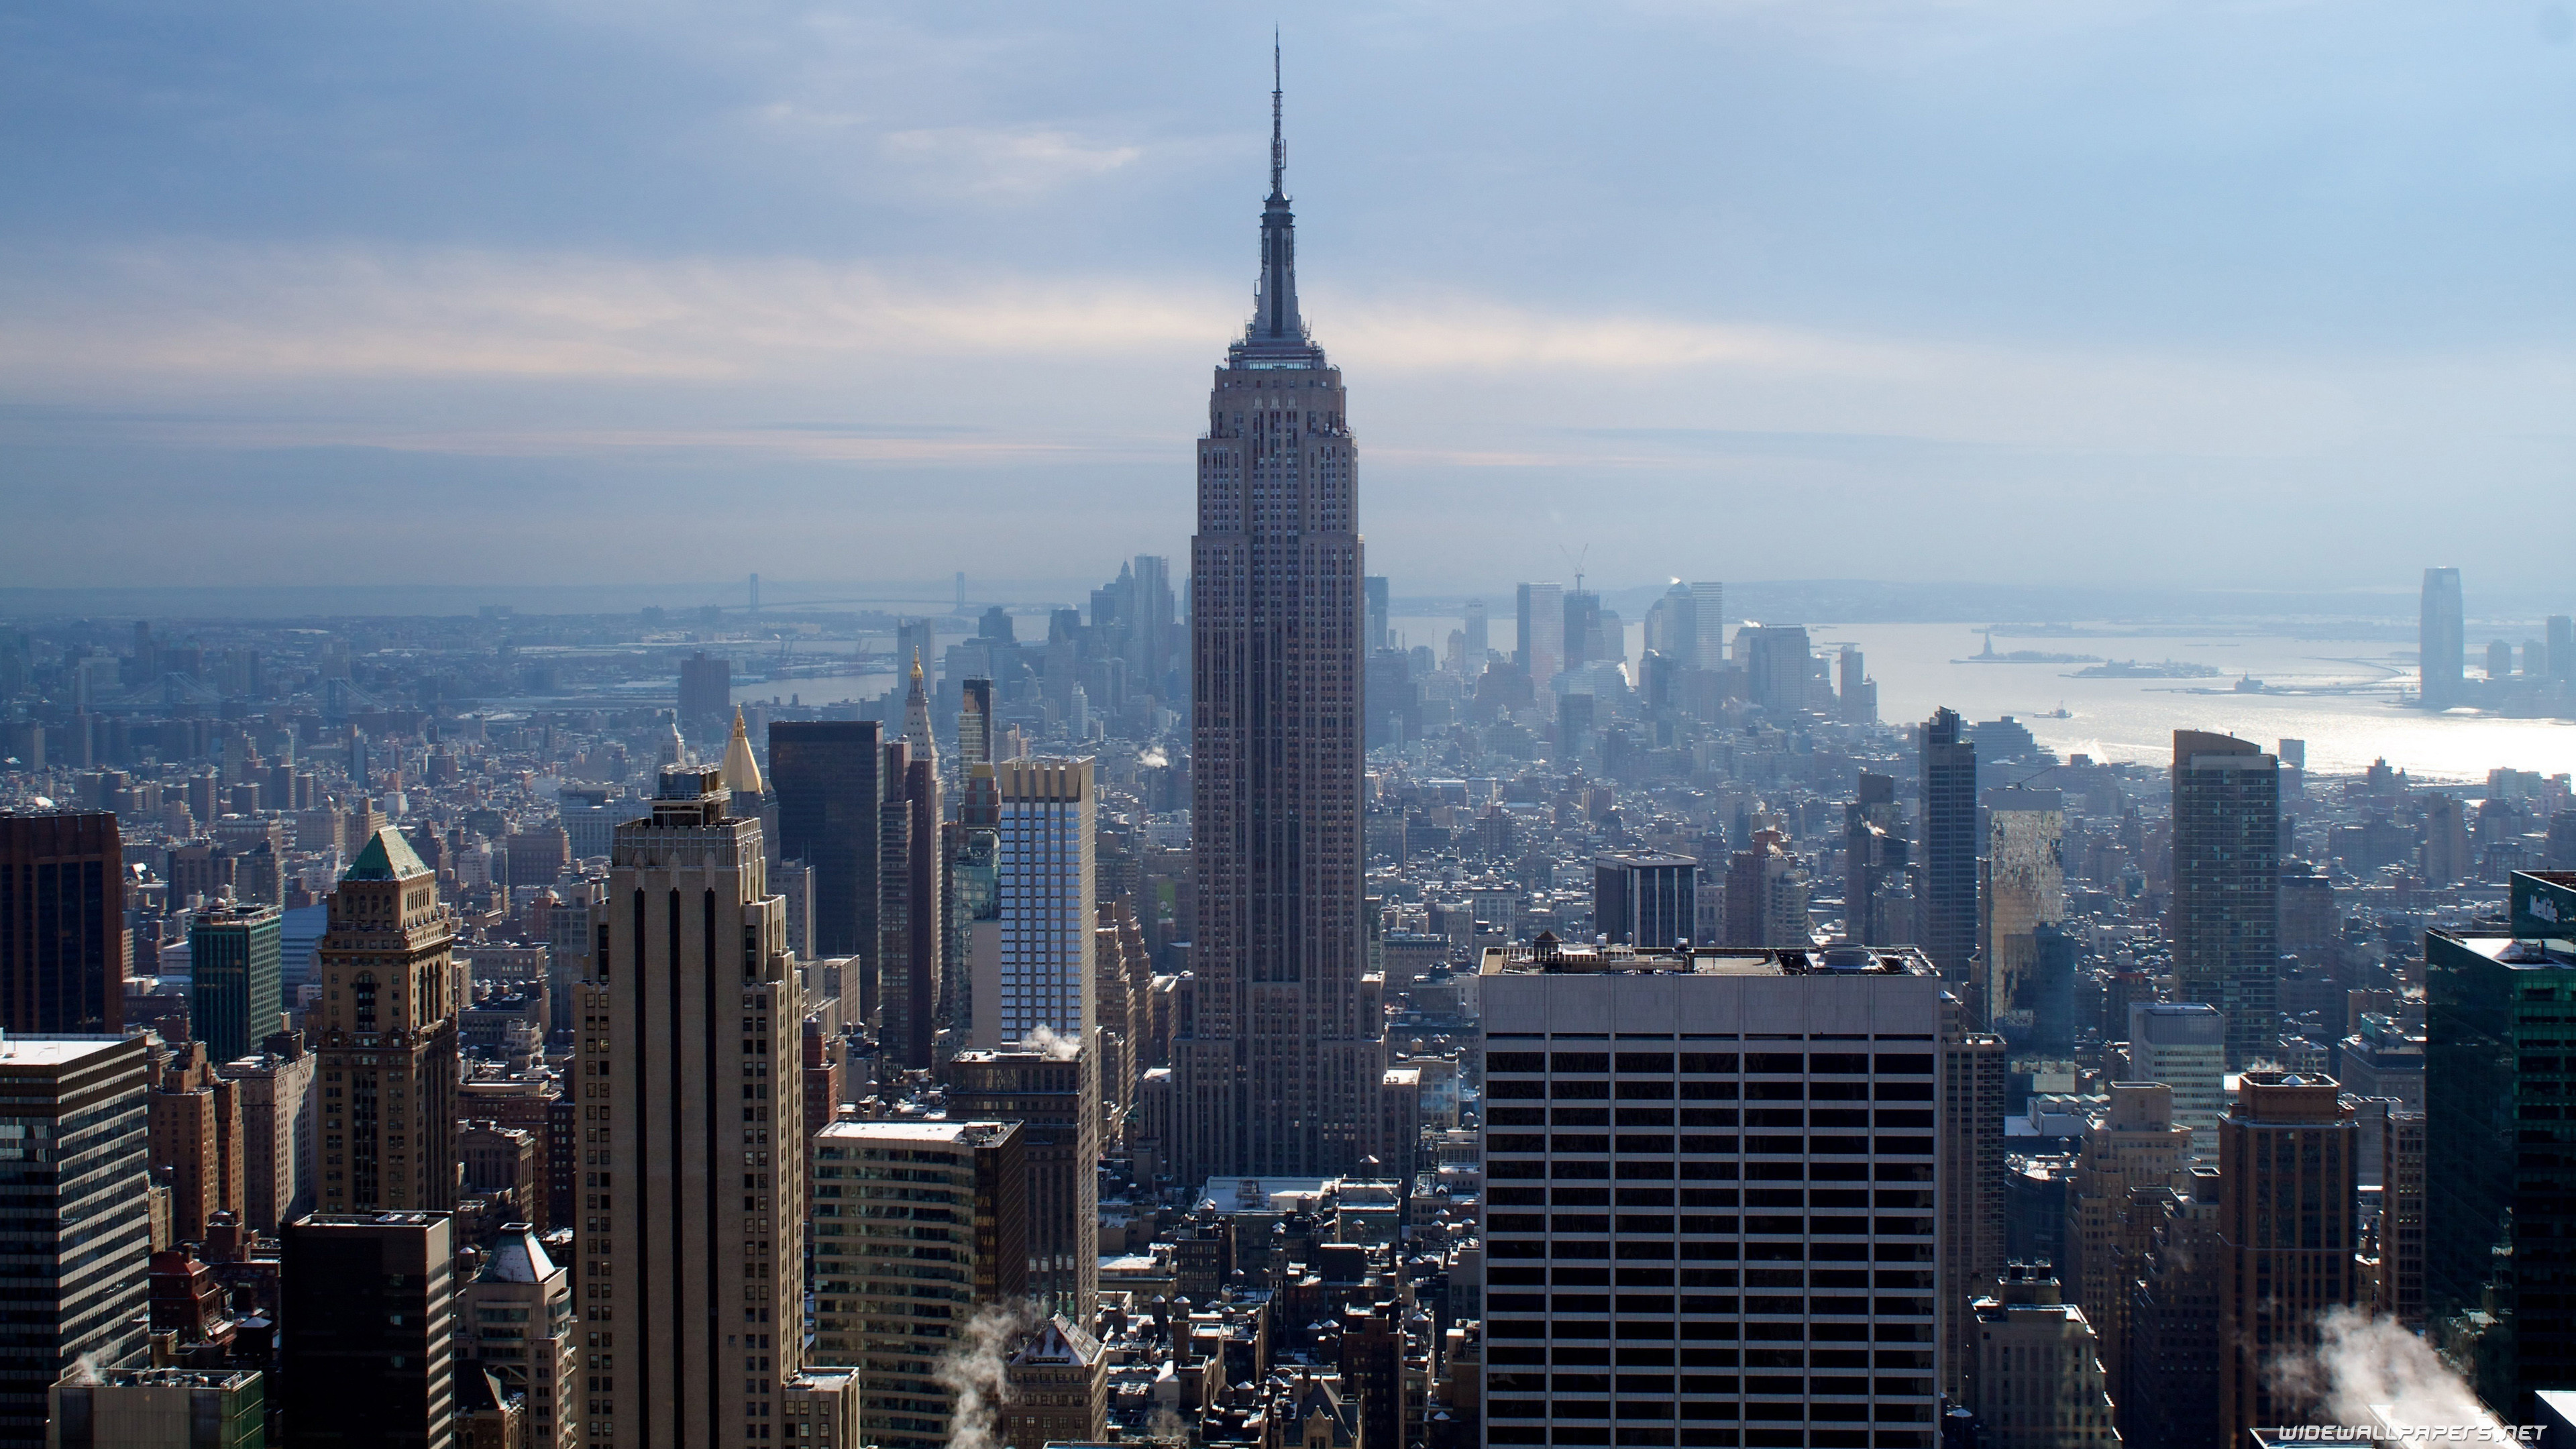 New York: The Empire State Building, A 102-story Art Deco skyscraper in Midtown Manhattan. 3840x2160 4K Background.